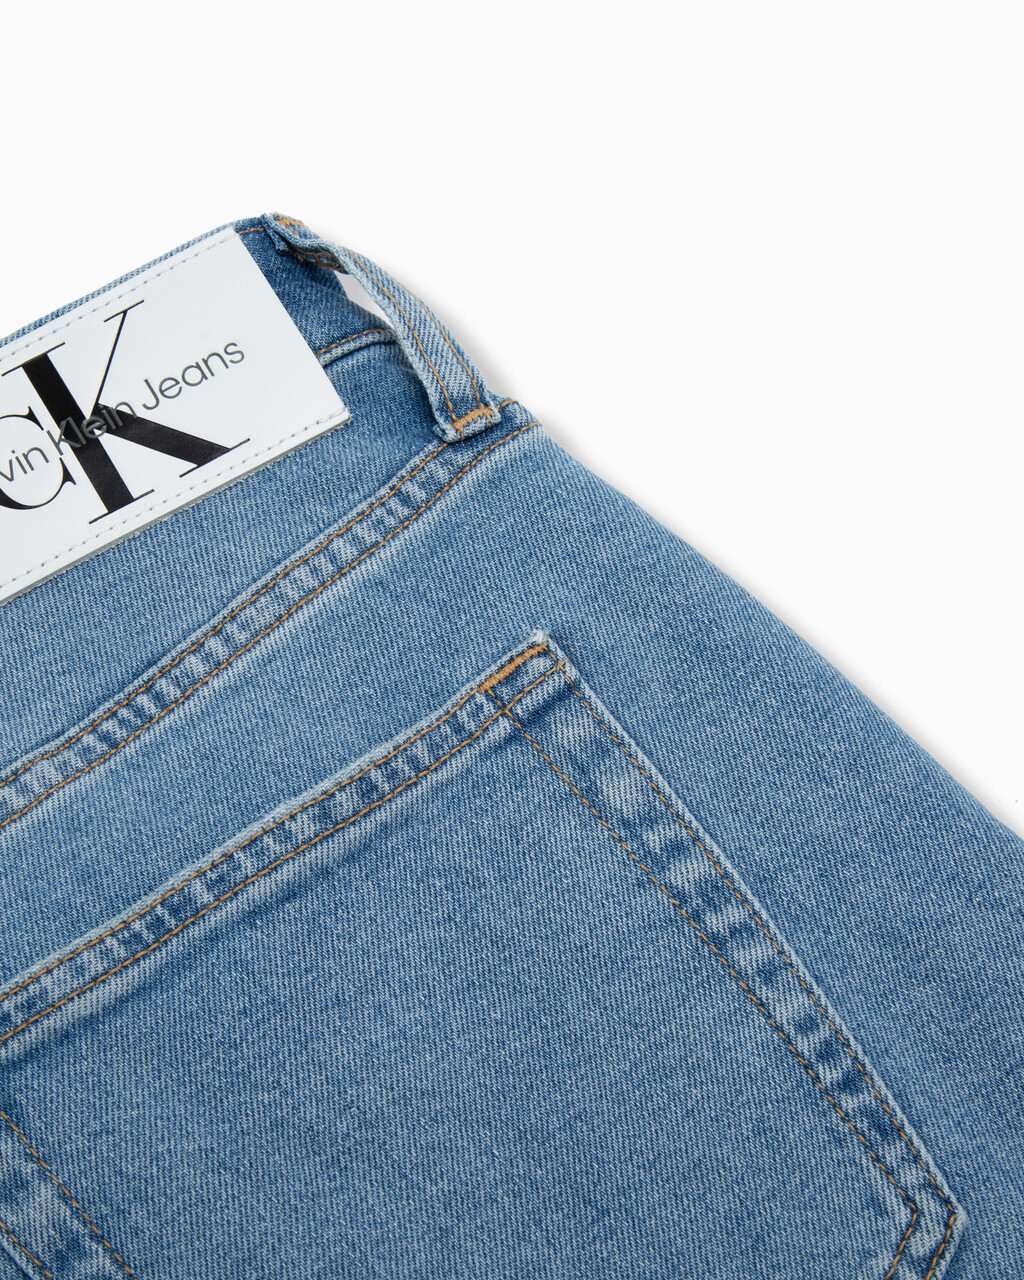 Recycled Cotton 90s Straight Jeans, Denim Light, hi-res